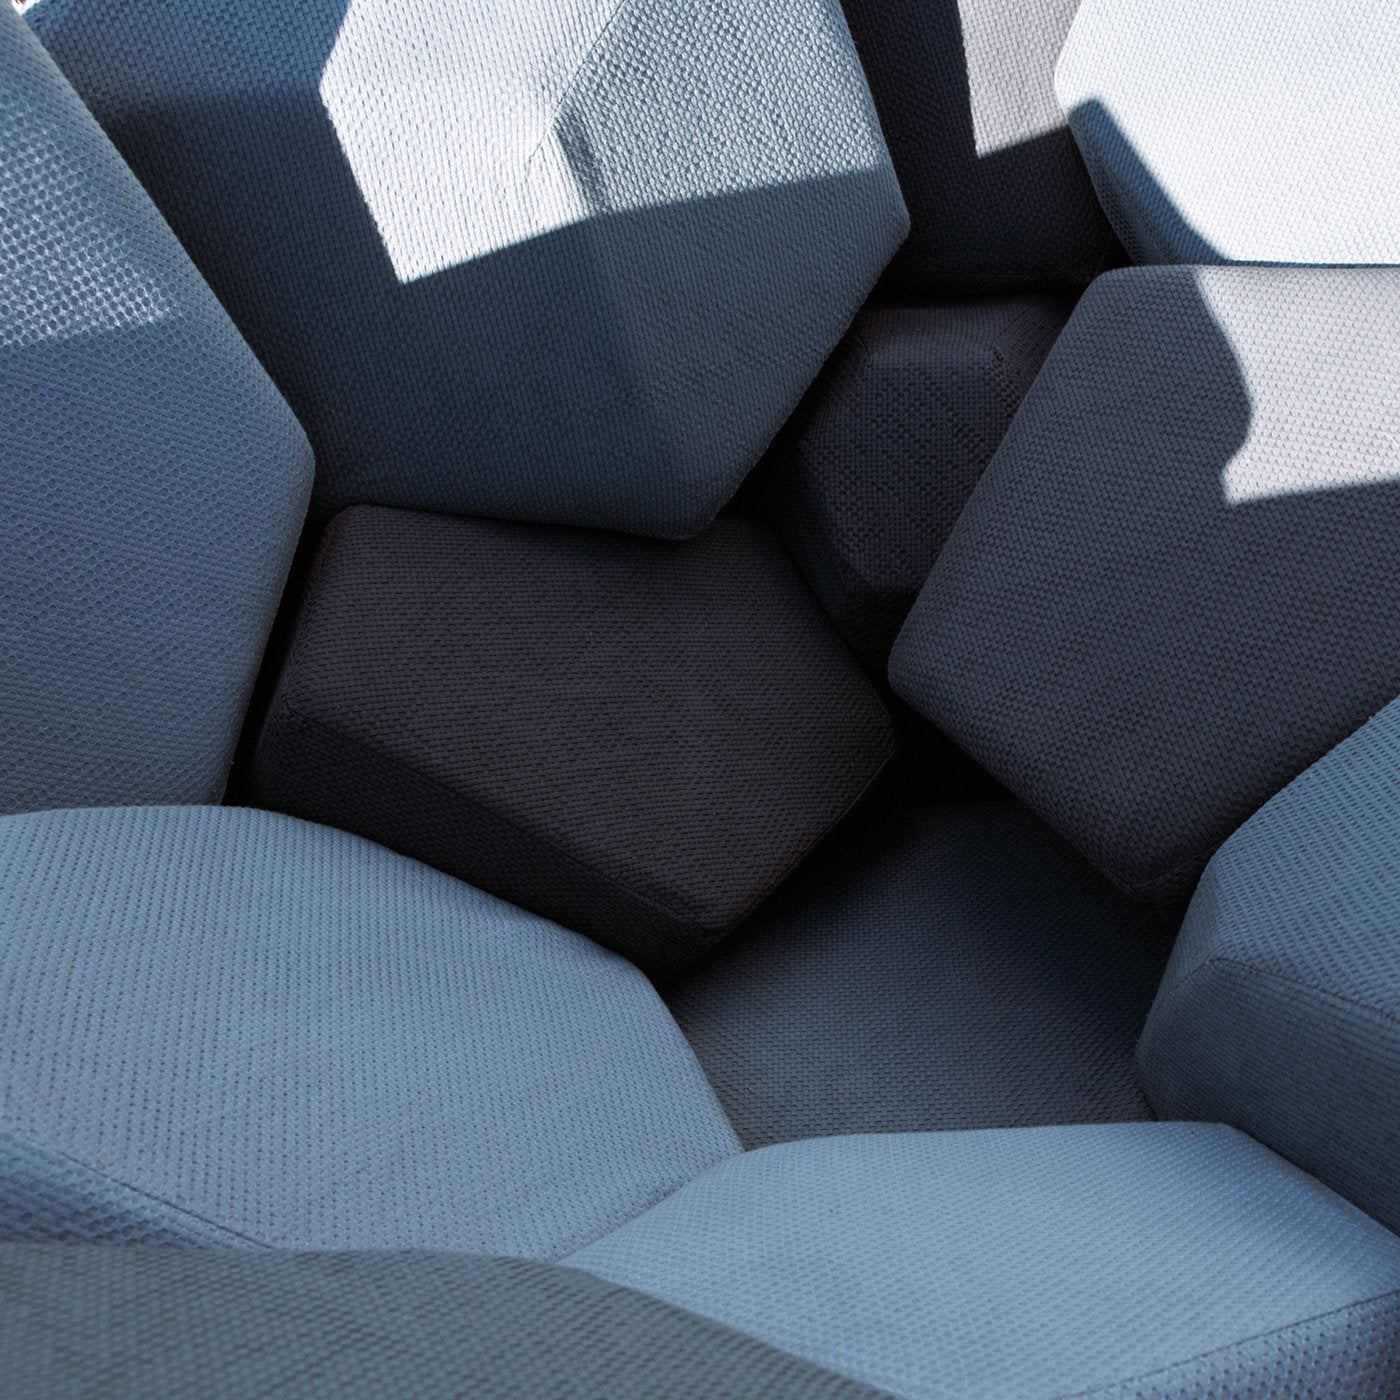 Quartz Ecological Armchair by CRTL ZAK and Davide Barzaghi - Alternative view 3